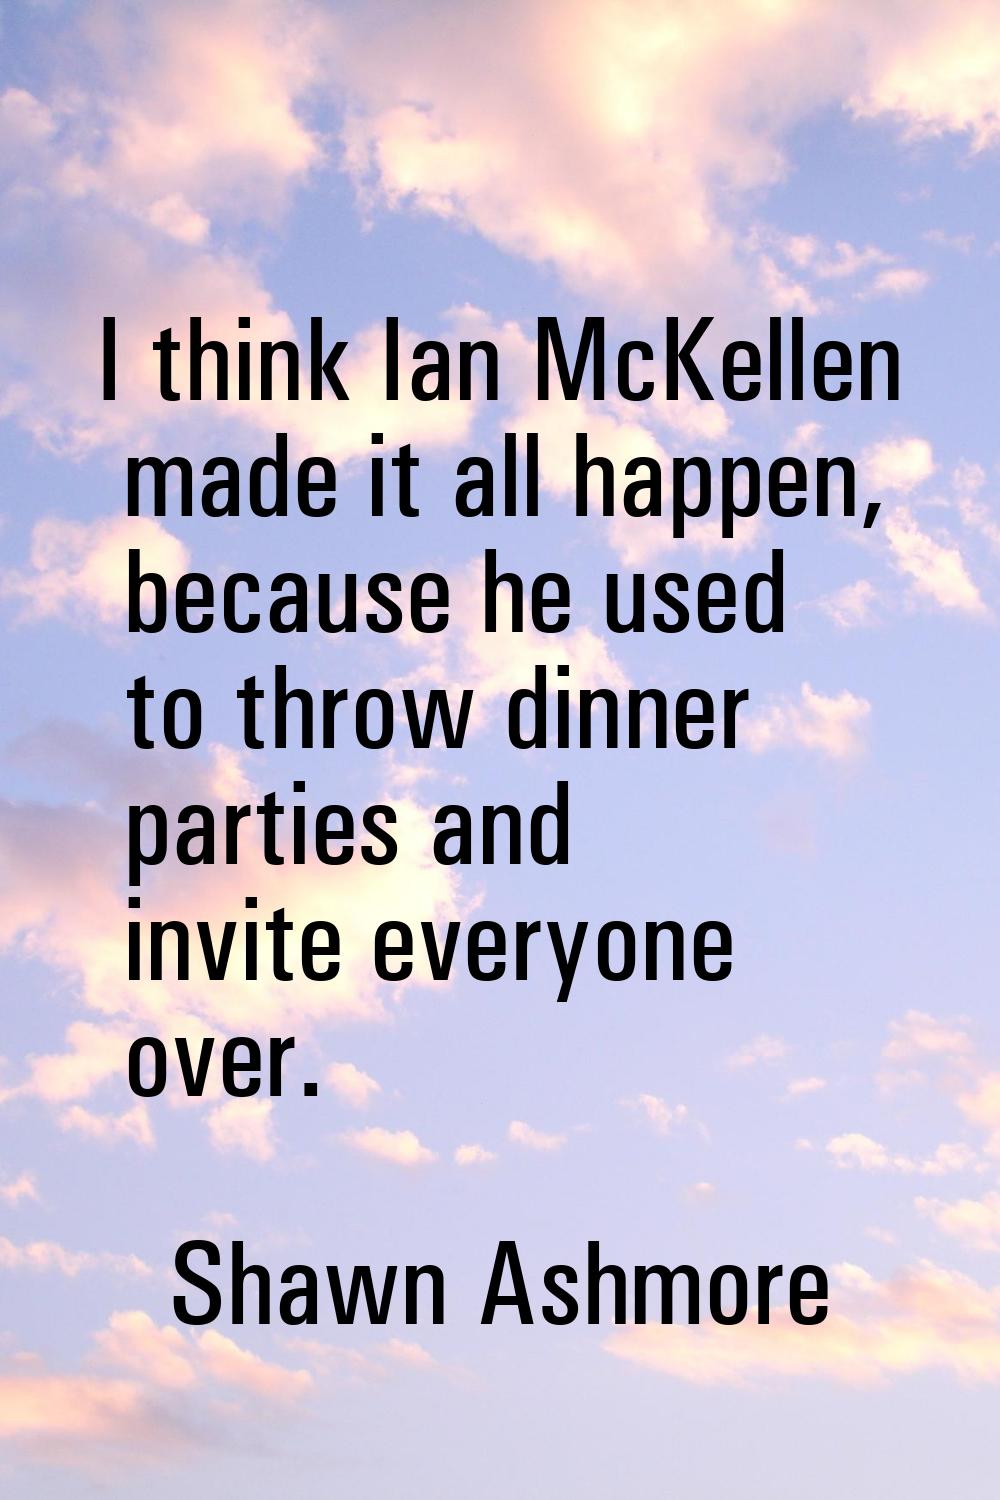 I think Ian McKellen made it all happen, because he used to throw dinner parties and invite everyon